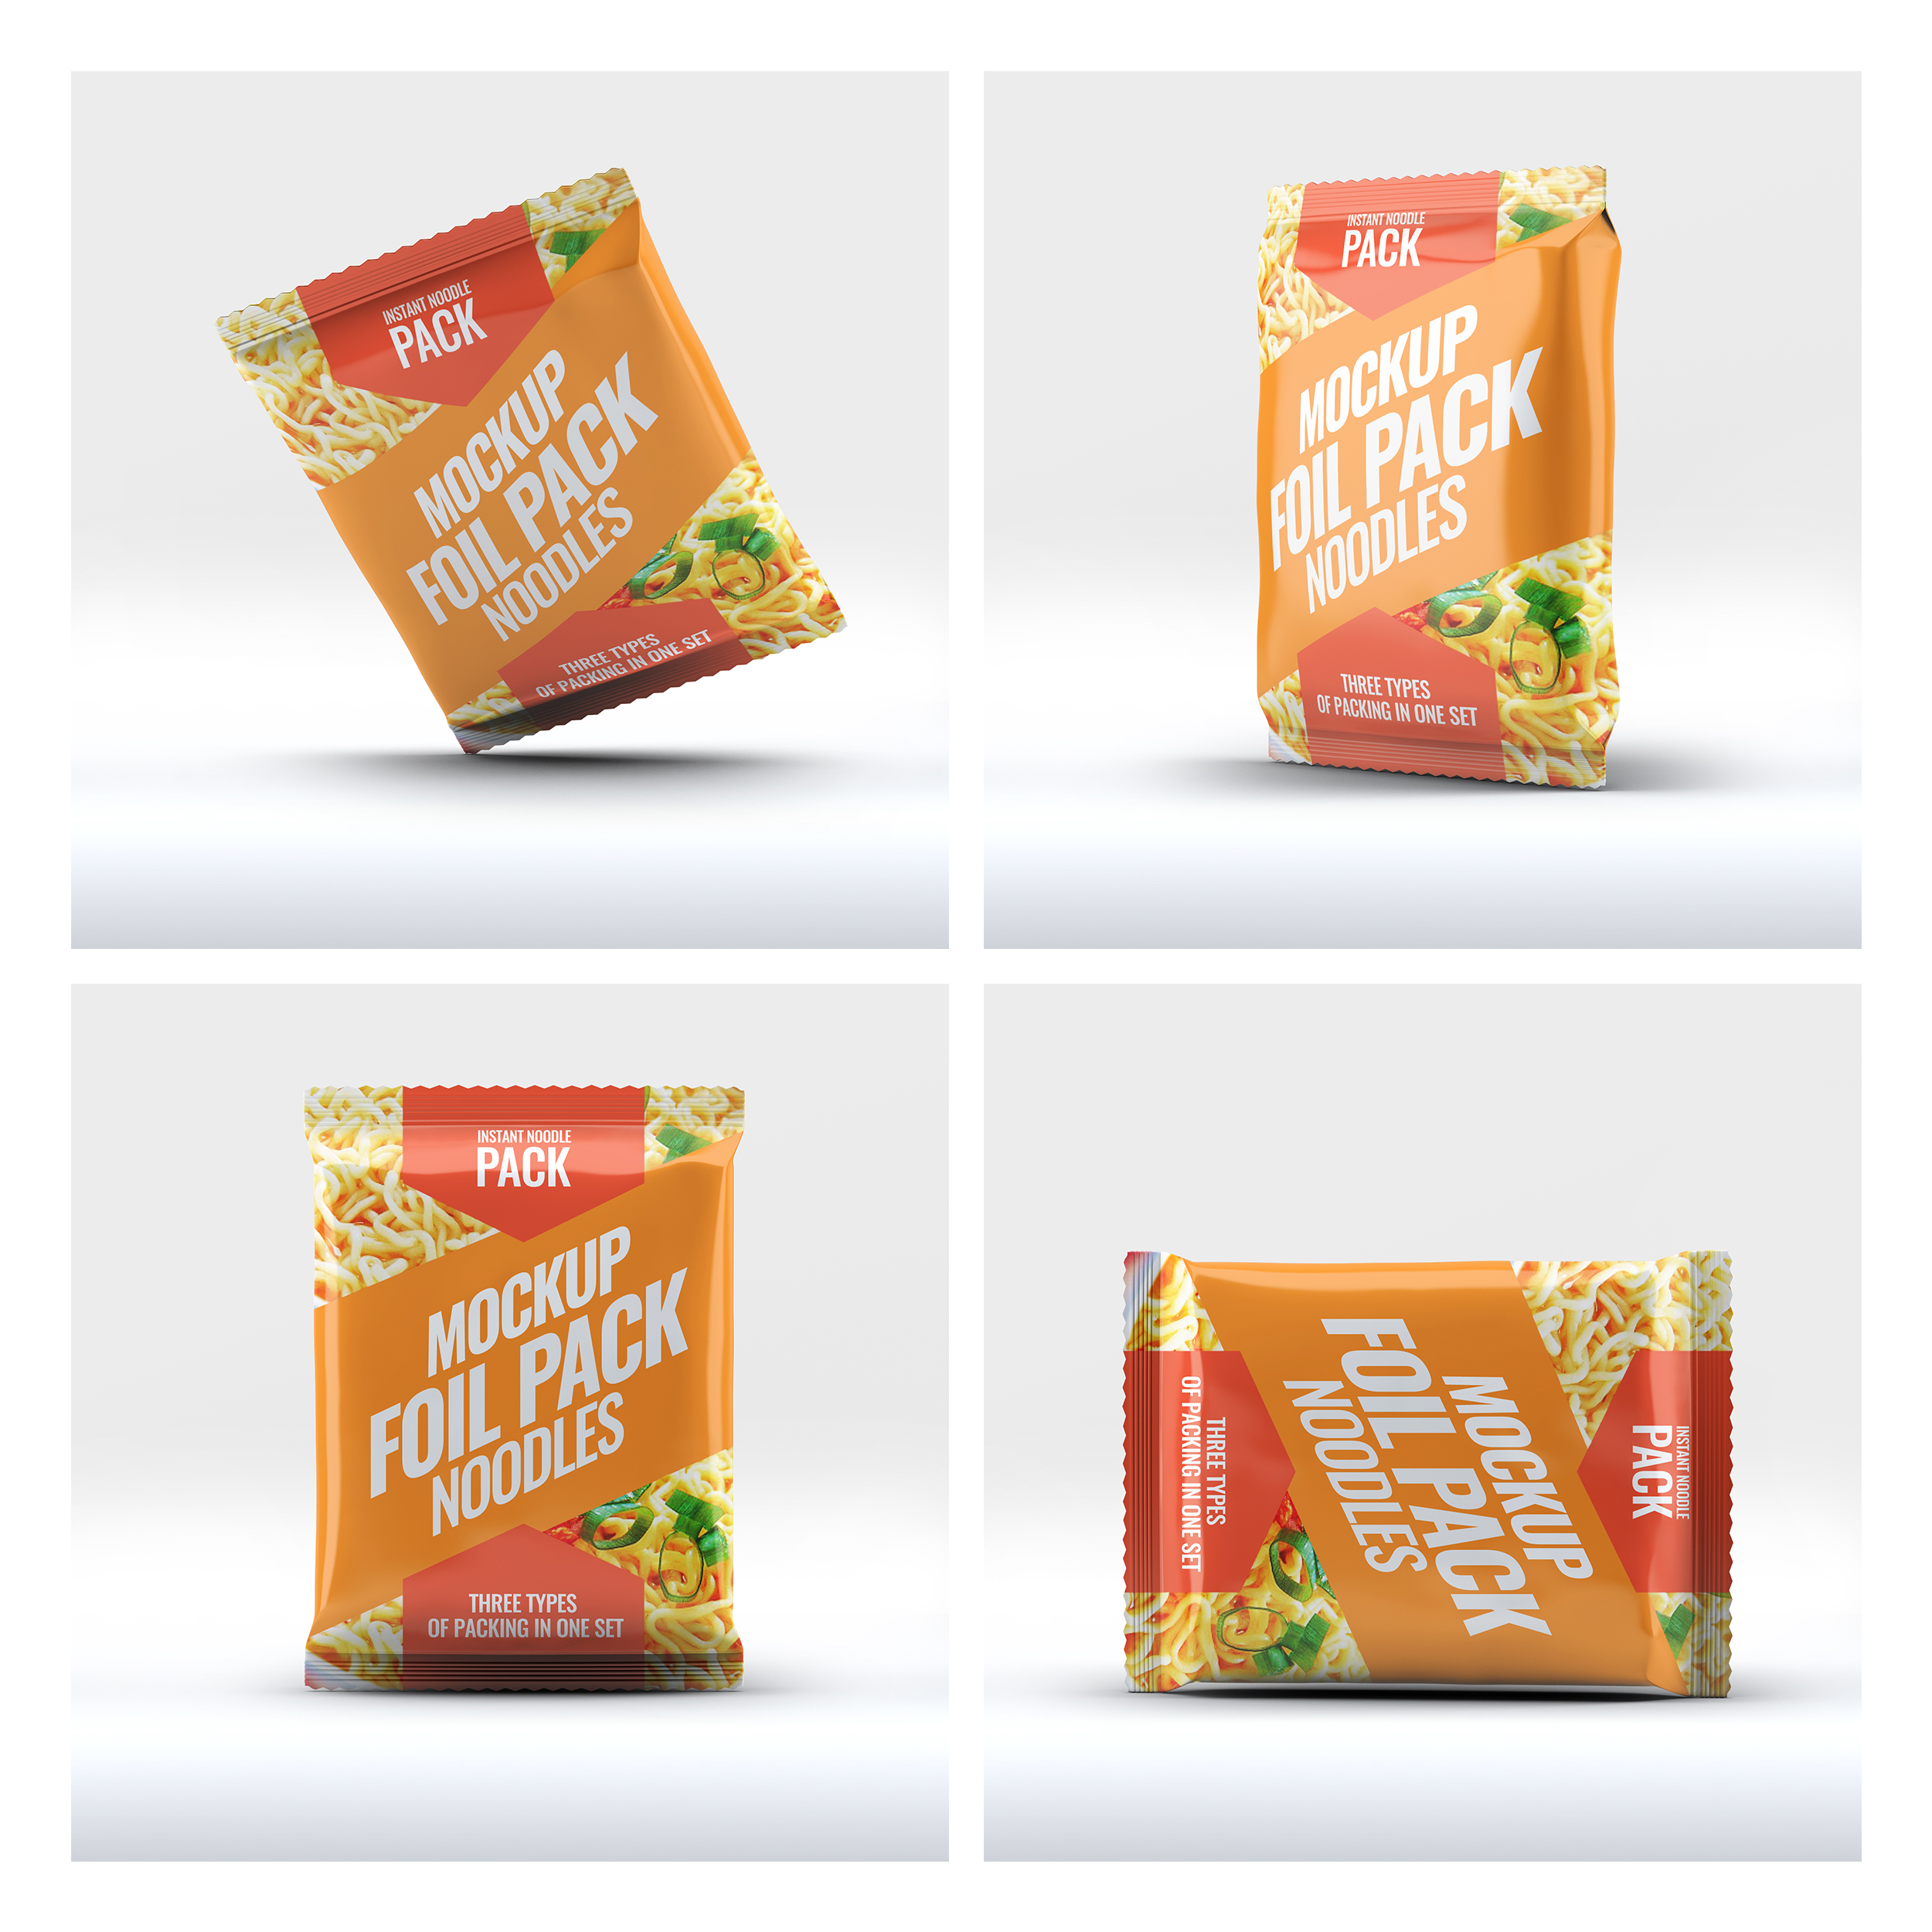 Download product Packaging Design and 3d Mockup 2 for $5 - SEOClerks